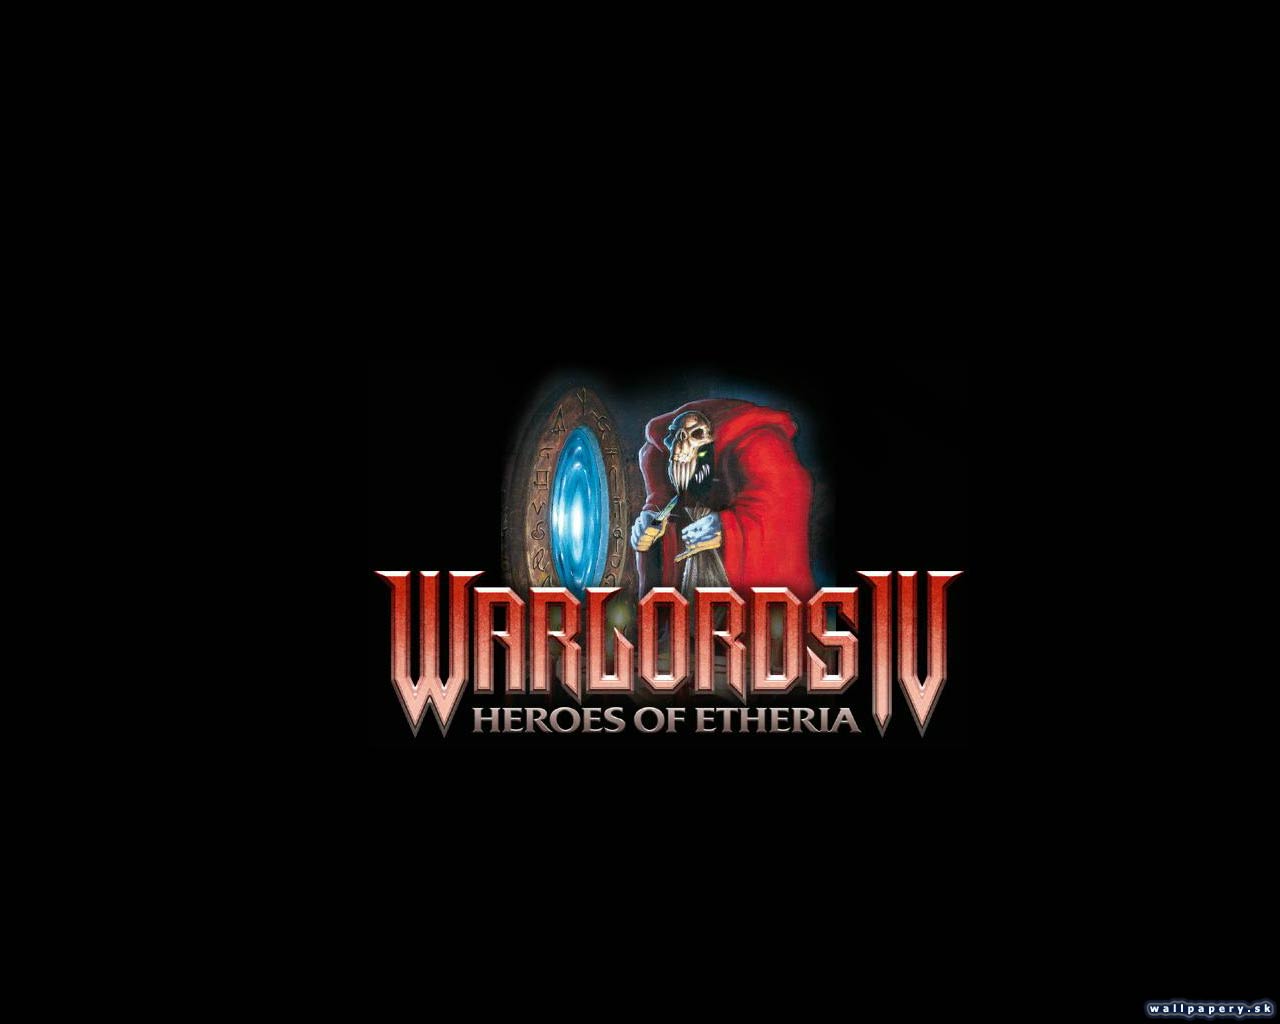 Warlords 4: Heroes of Etheria - wallpaper 11